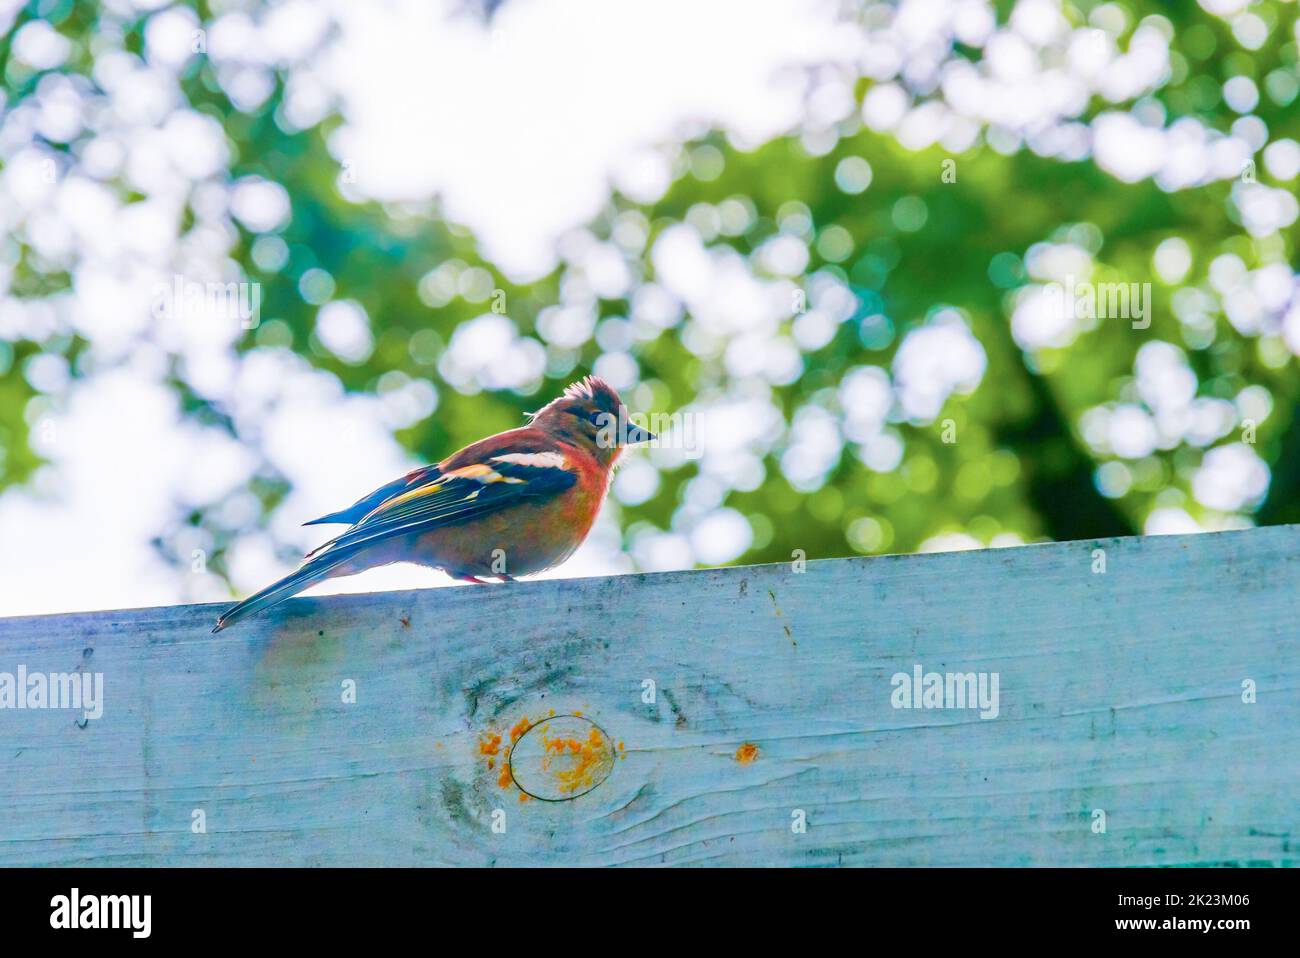 Fringilla coelebs also known as common chaffinch or chaffinch, perched on a wooden fence in the marinskij park of Kiev, Ukraine Stock Photo